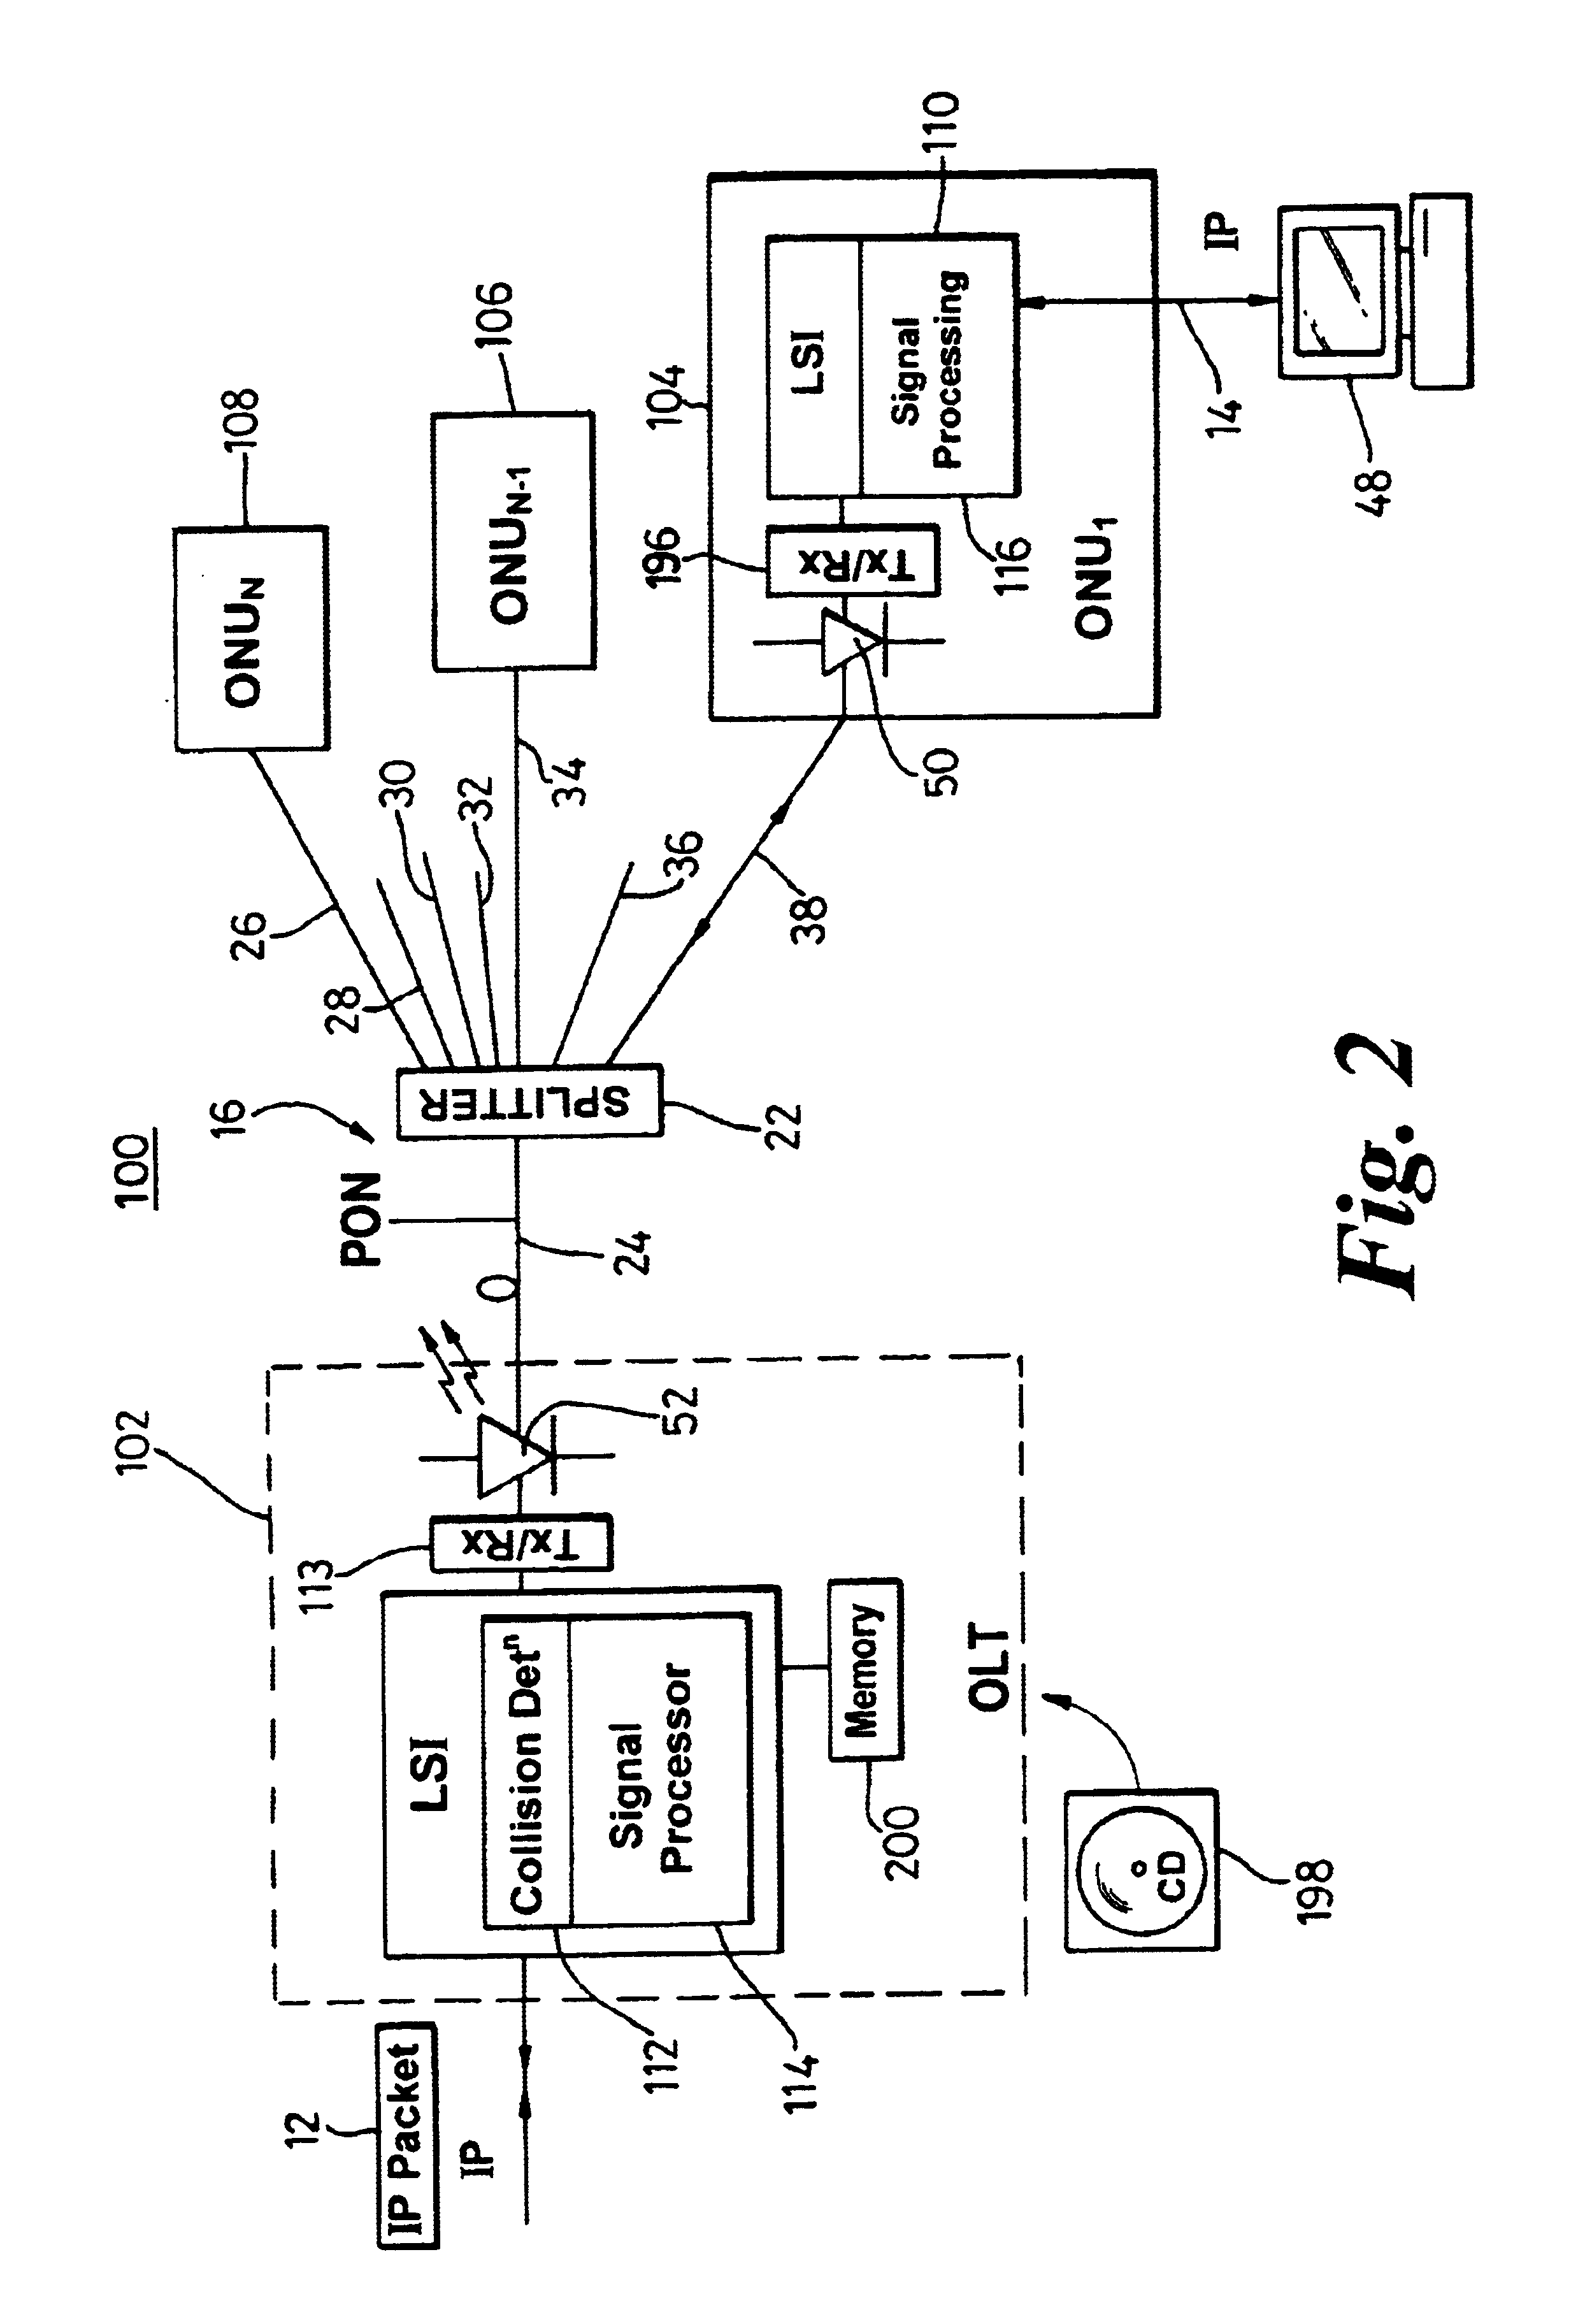 System and method for transfer of IP data in an optical communication networks